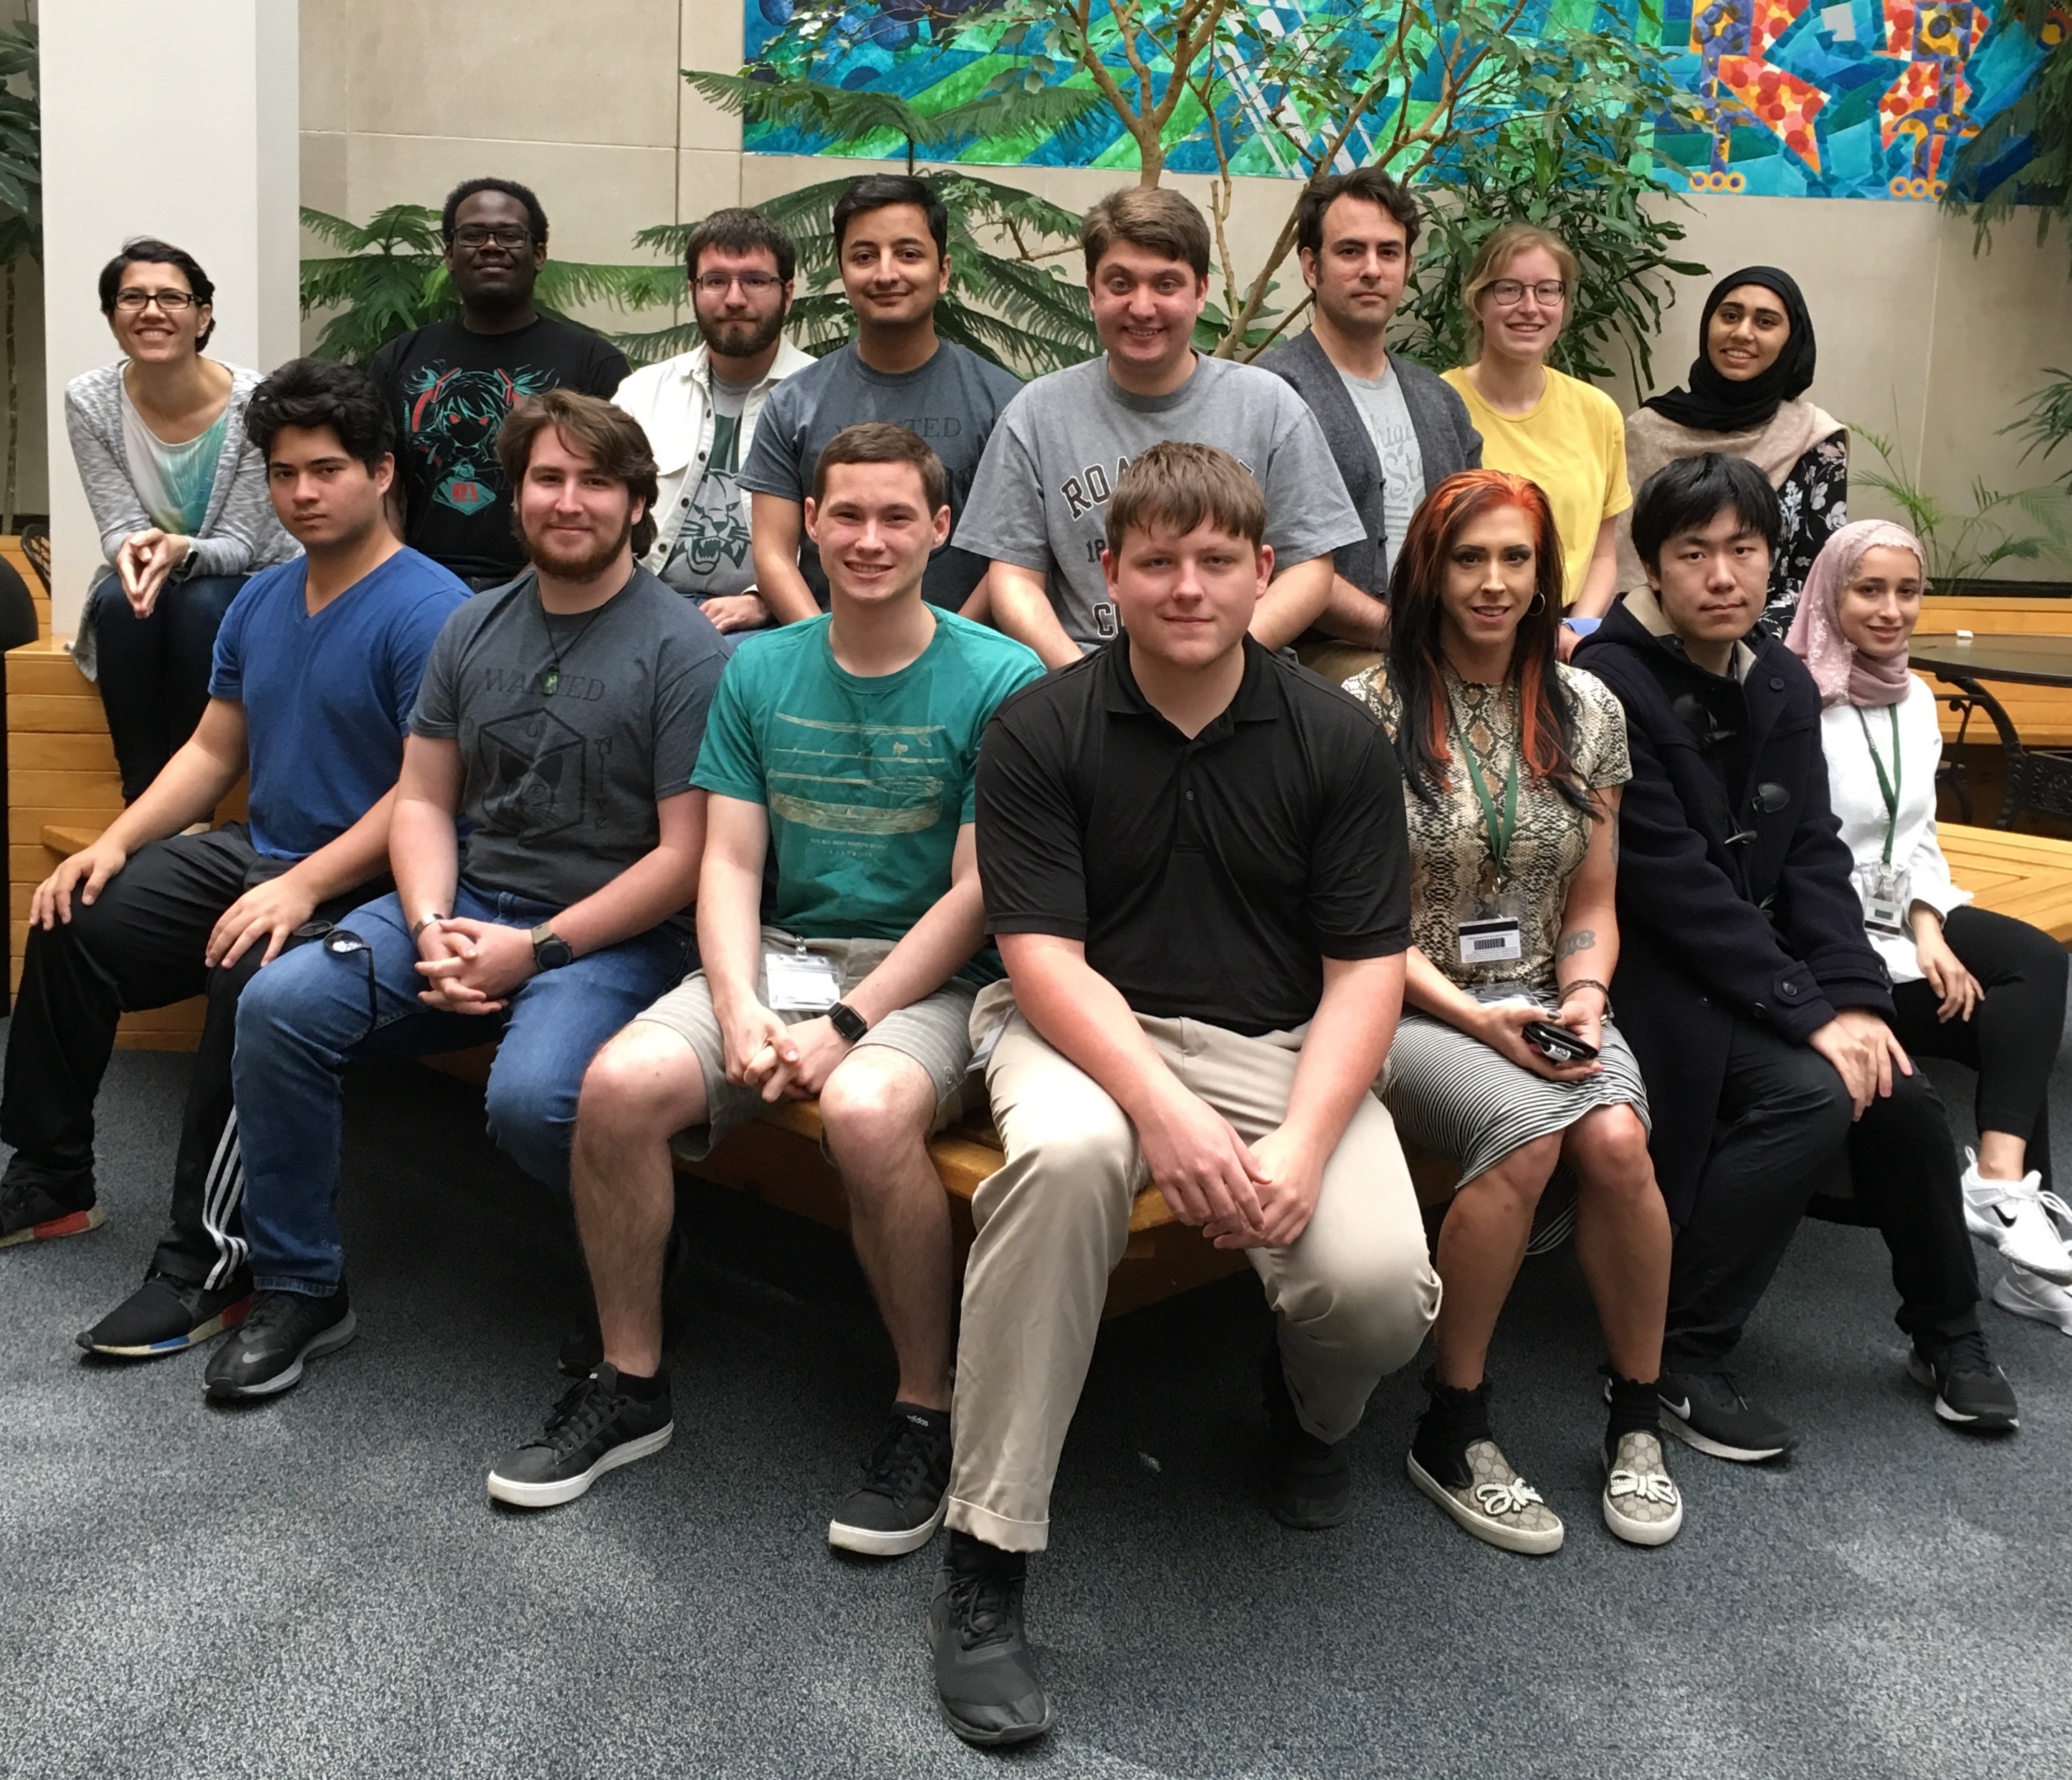 The National Superconducting Cyclotron Laboratory hosted the 2019 Nuclear Science Summer School (NS3) from 12-18 May. This is the fourth year for the annual educational event.